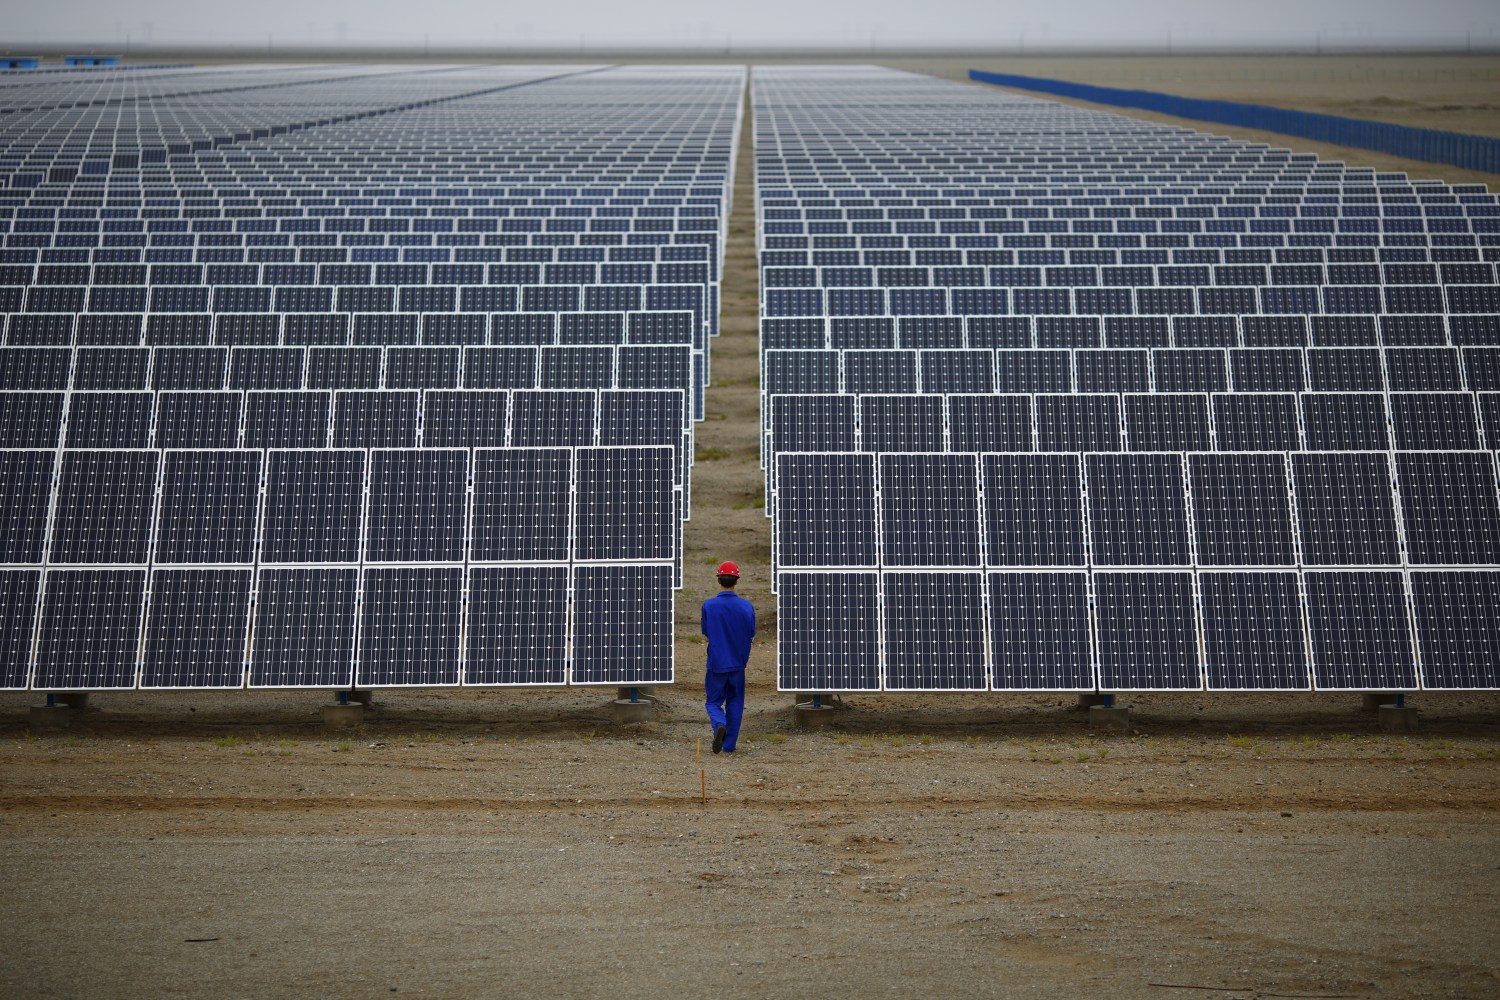 A worker inspects solar panels at a solar Dunhuang, 950km (590 miles) northwest of Lanzhou, Gansu Province September 16, 2013. China is pumping investment into wind power, which is more cost-competitive than solar energy and partly able to compete with coal and gas. China is the world's biggest producer of CO2 emissions, but is also the world's leading generator of renewable electricity. Environmental issues will be under the spotlight during a working group of the Intergovernmental Panel on Climate Change, which will meet in Stockholm from September 23-26. REUTERS/Carlos Barria    BEST QUALITY AVAILABLE - GF20000056392